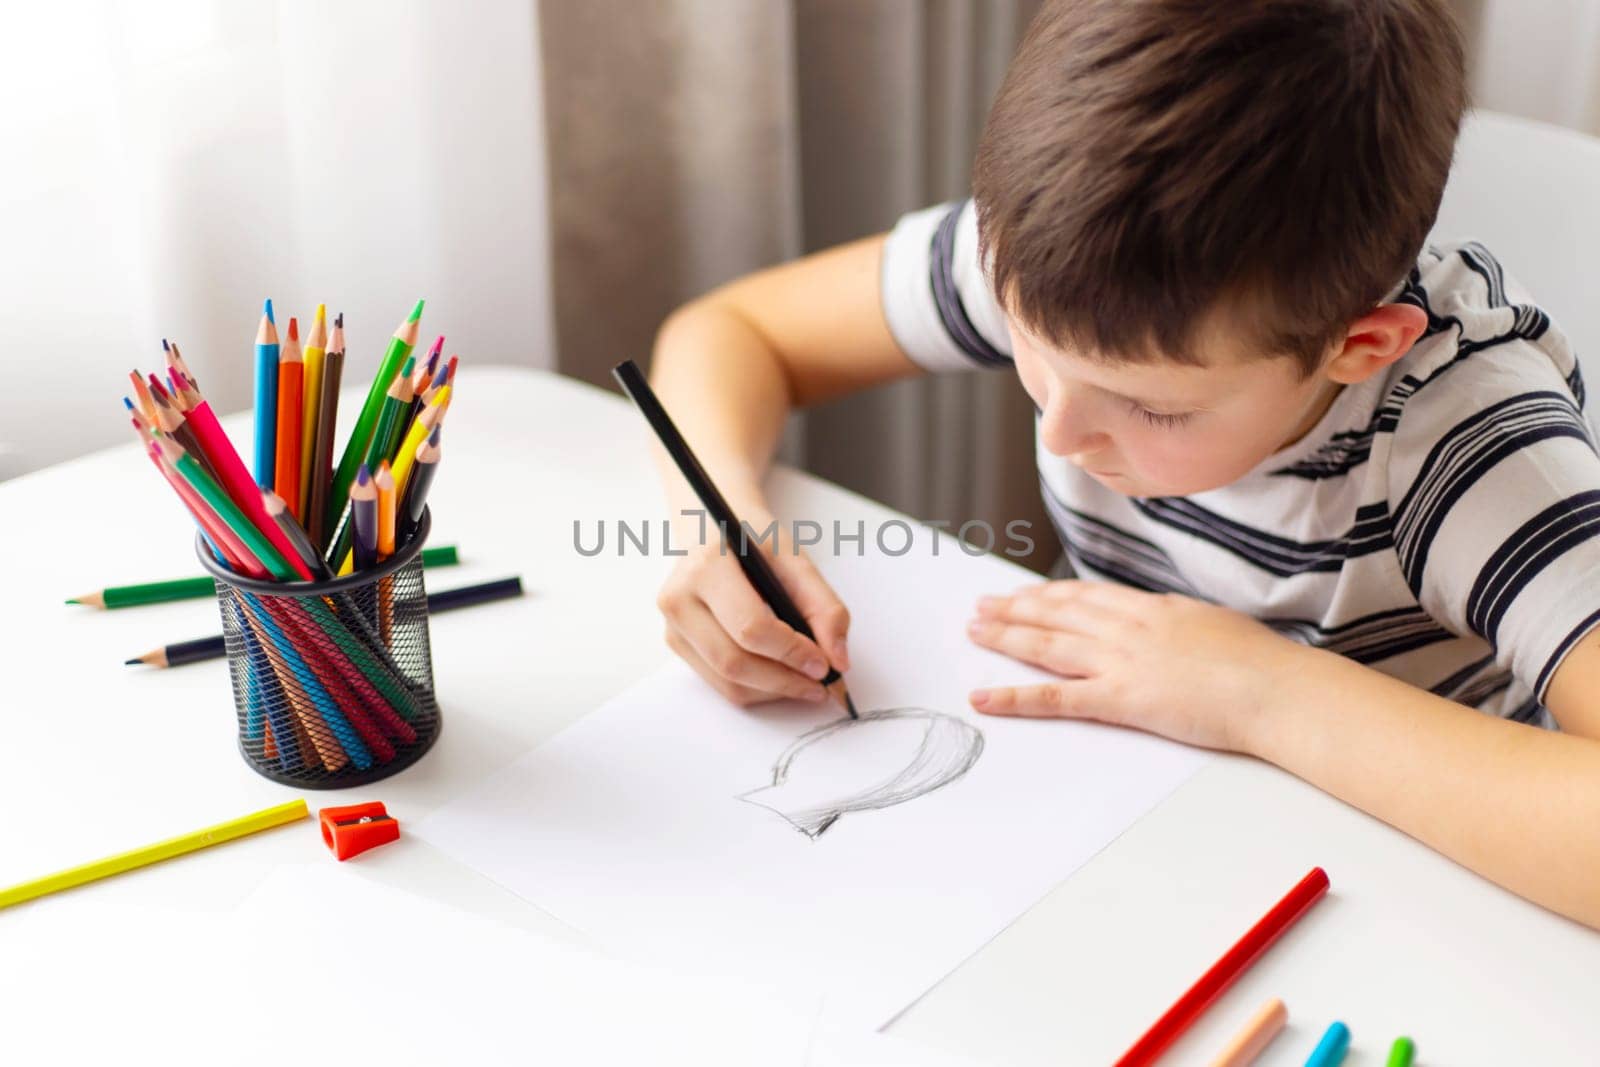 A child boy draws on white paper with colored pencils while sitting at a table.